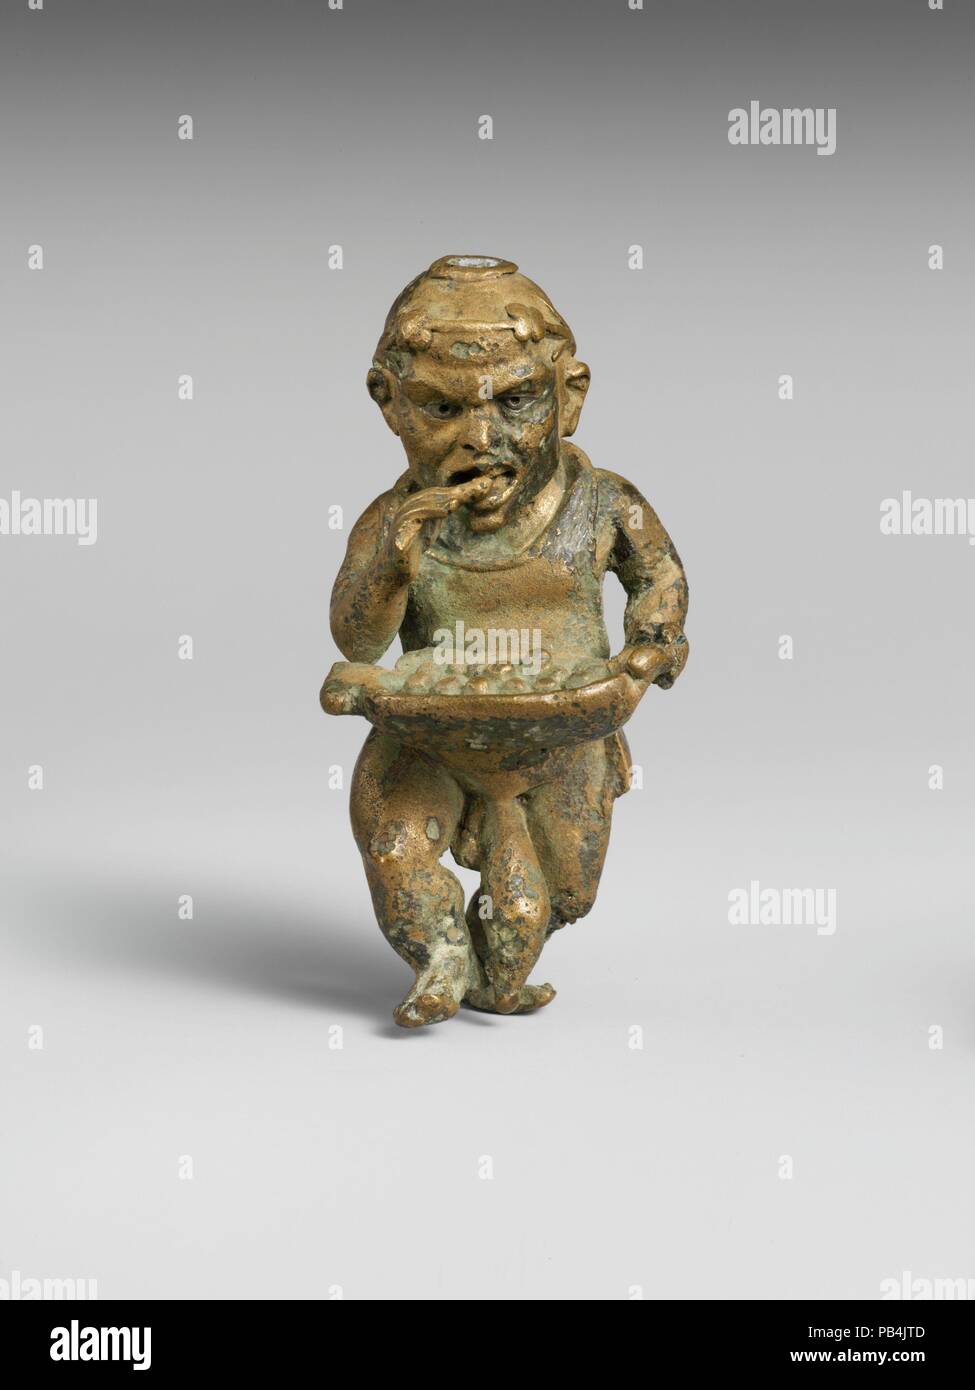 Bronze statuette of a dwarf with silver eyes. Culture: Greek or Roman. Dimensions: H. 3 1/8 in. (7.9 cm). Date: 1st century B.C.-1st century A.D..  The dwarf wears a wreath and carries a large tray of eatables from which he is helping himself. He may be a caricature of a street hawker at a festival. He has an apron tied at the back of his neck, and a bag hangs at his side. The type is Hellenistic, but the execution is probably Roman. Museum: Metropolitan Museum of Art, New York, USA. Stock Photo